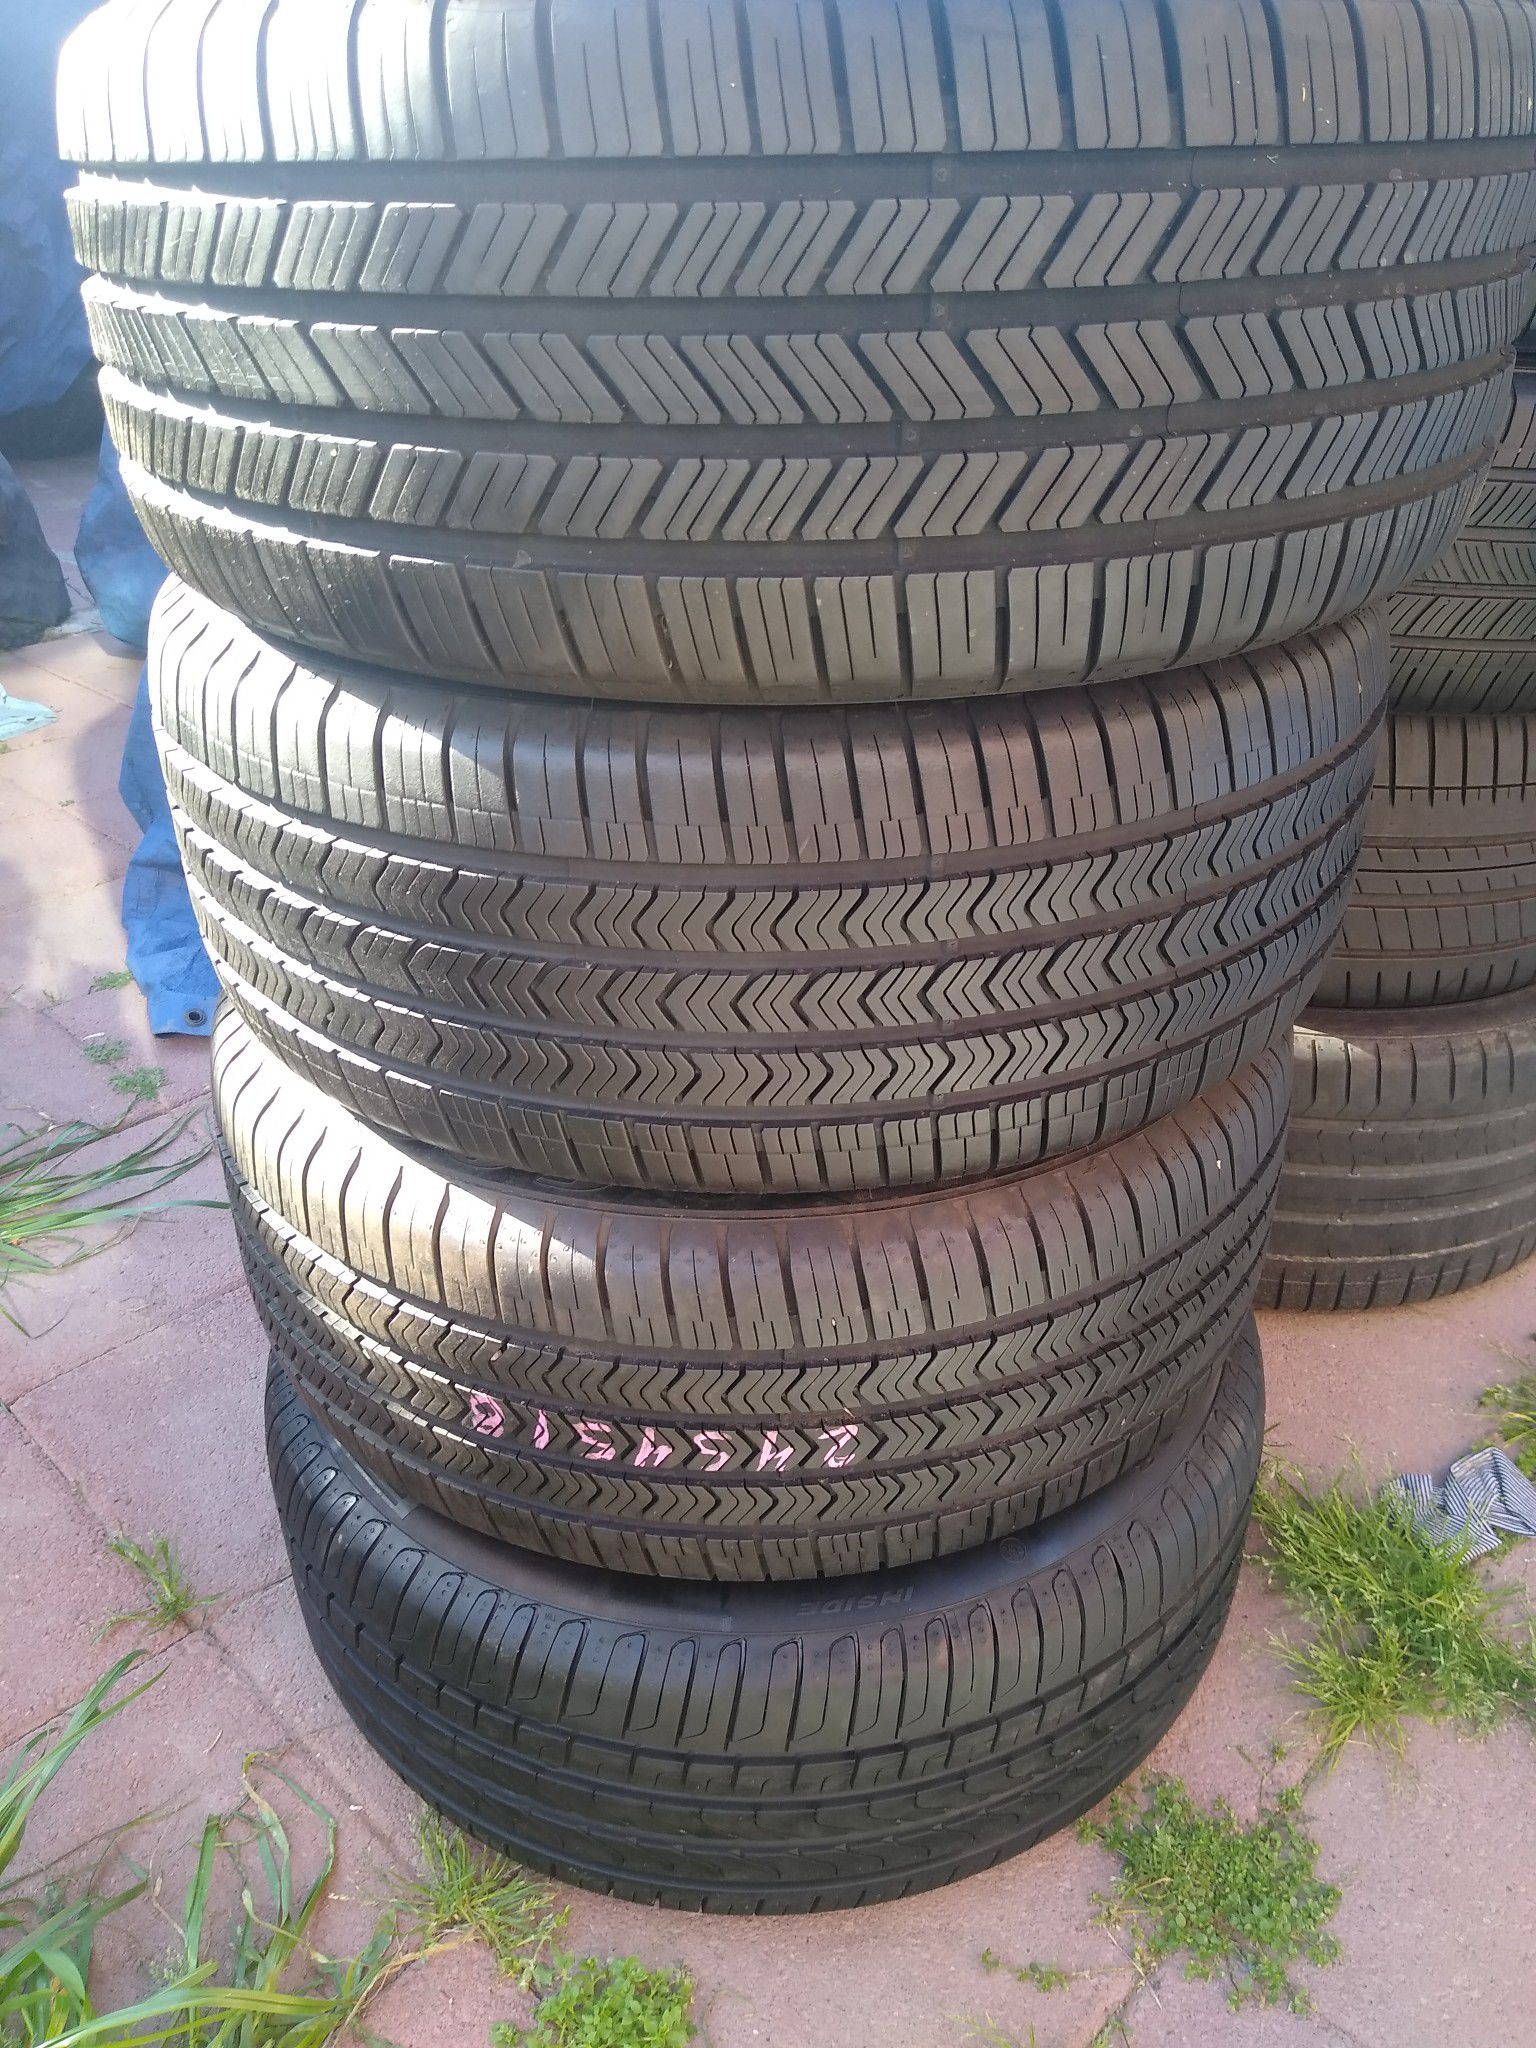 4 tires size 245/45/R18 like new condition.